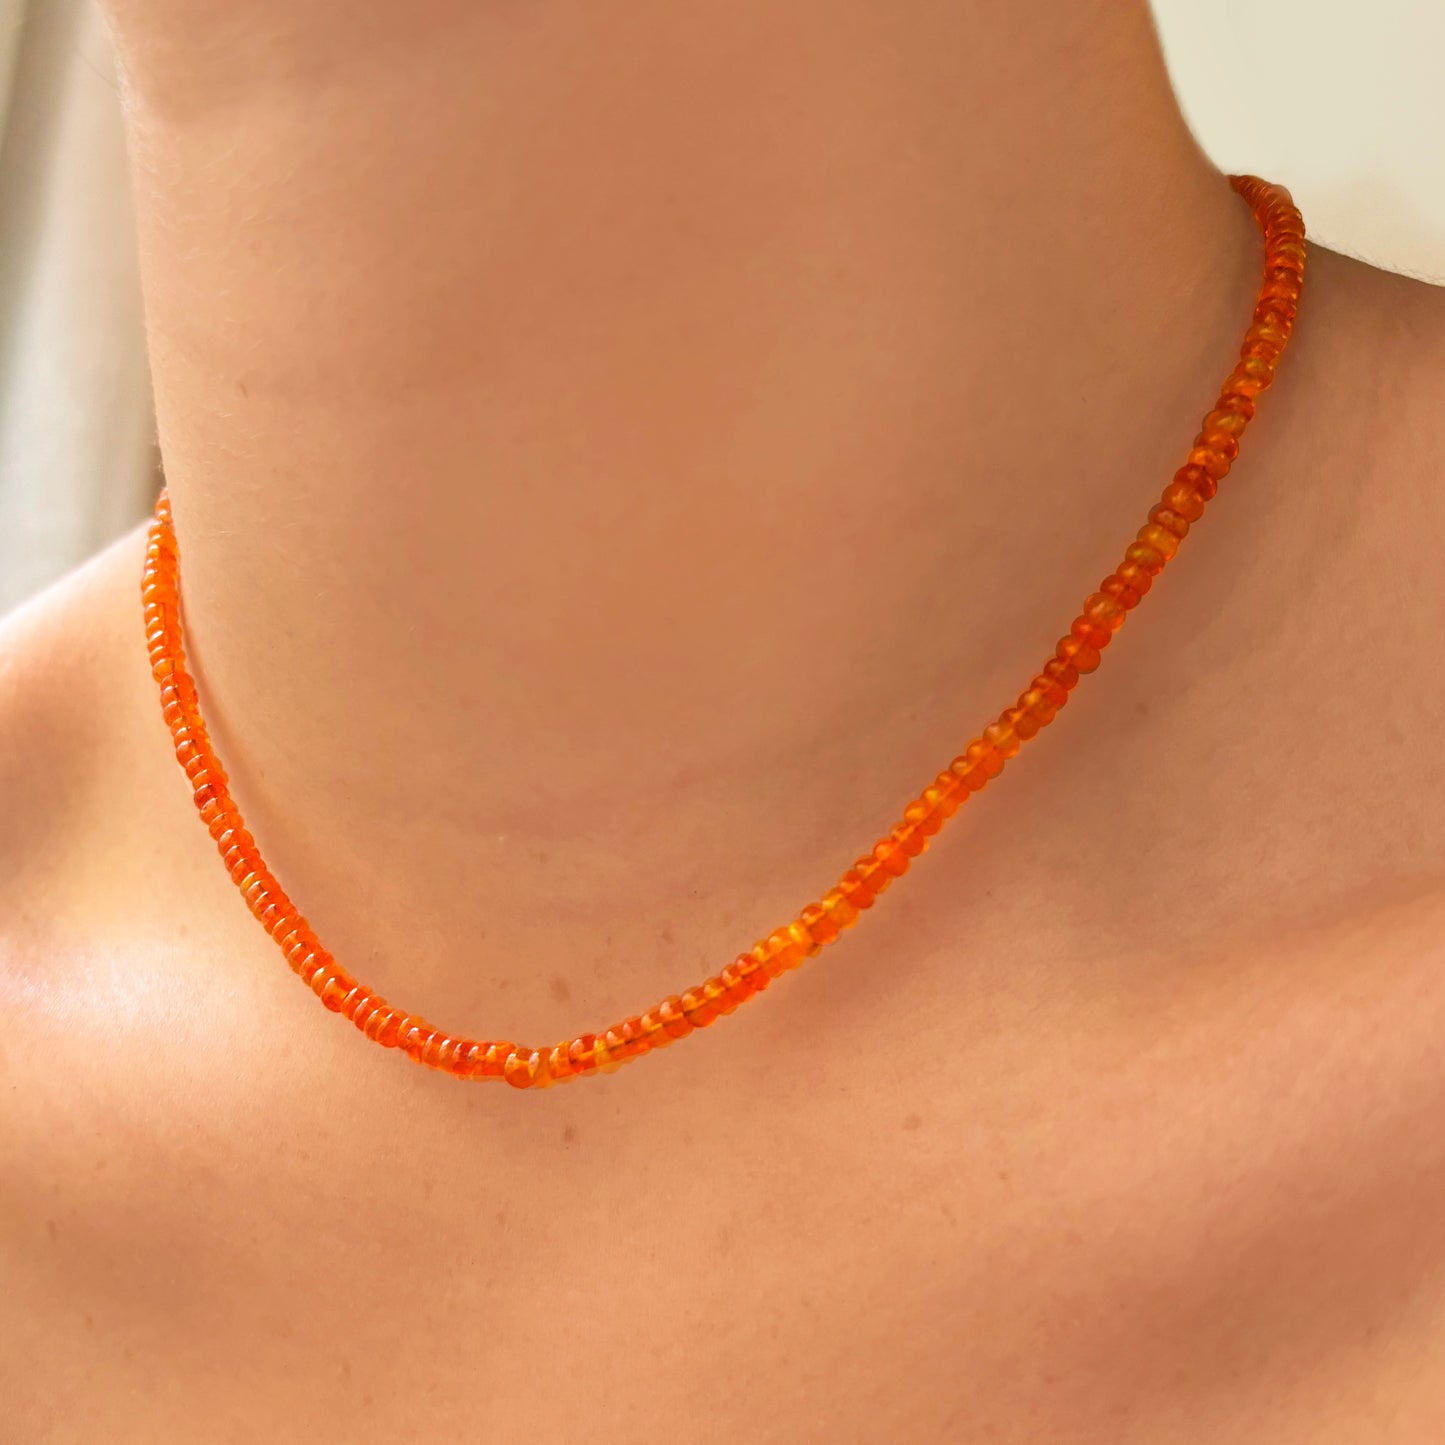 Shimmering beaded necklace made of smooth opal rondels in shades of orange on a slim gold lobster clasp. 